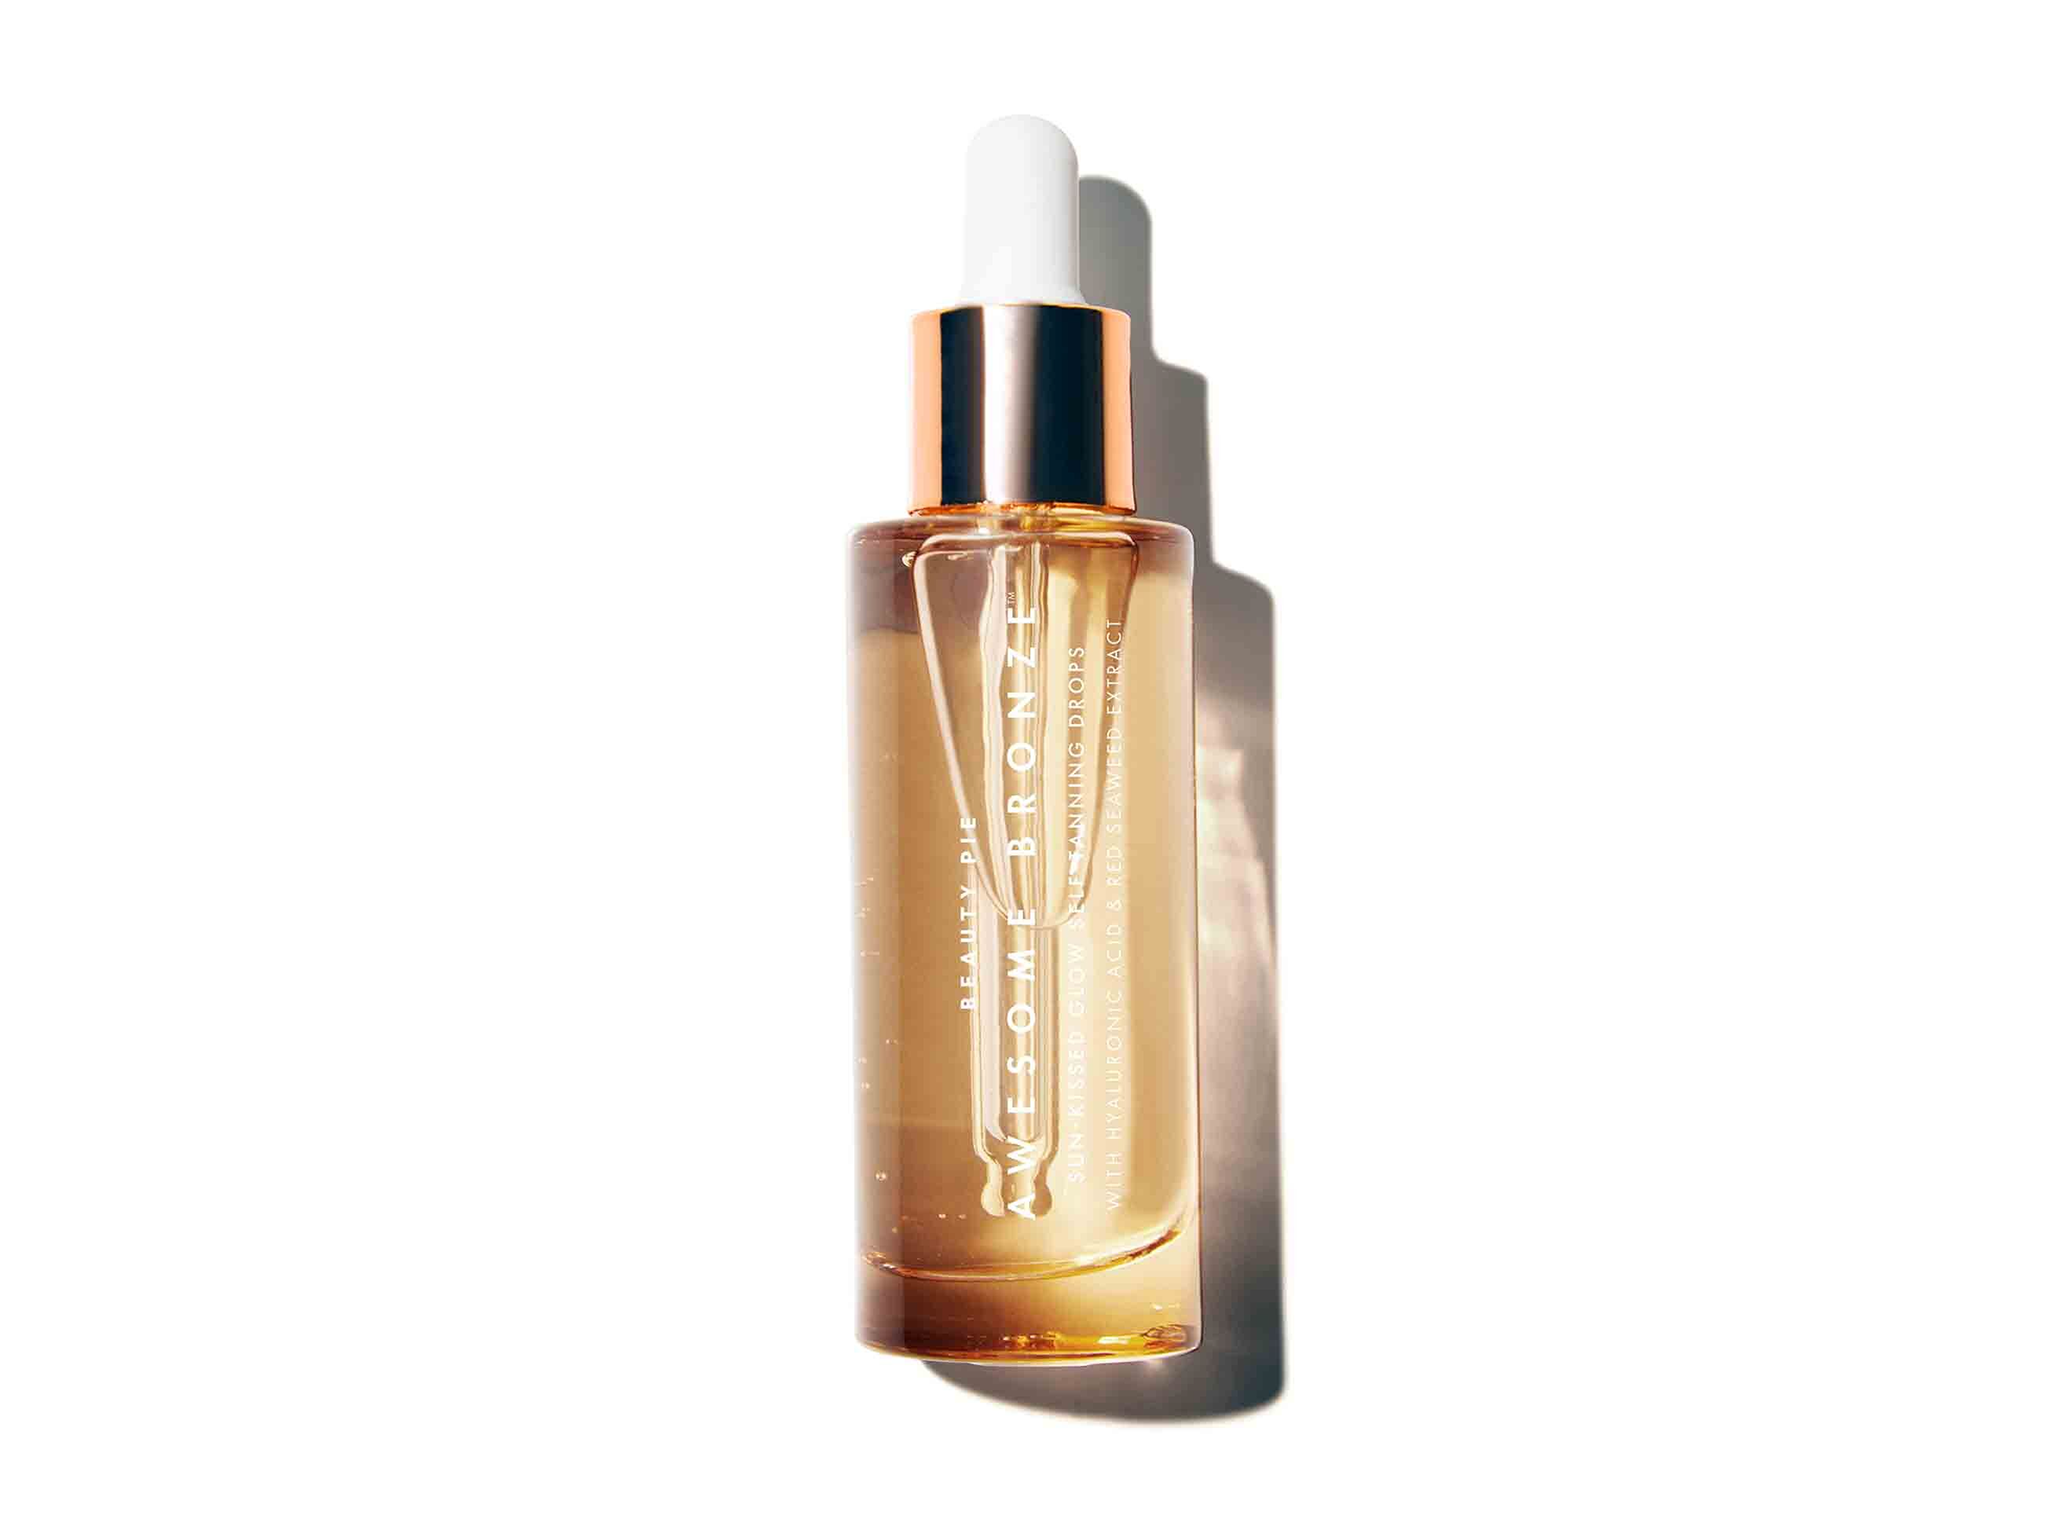 Beauty Pie awesome bronze gradual self-tanning drops